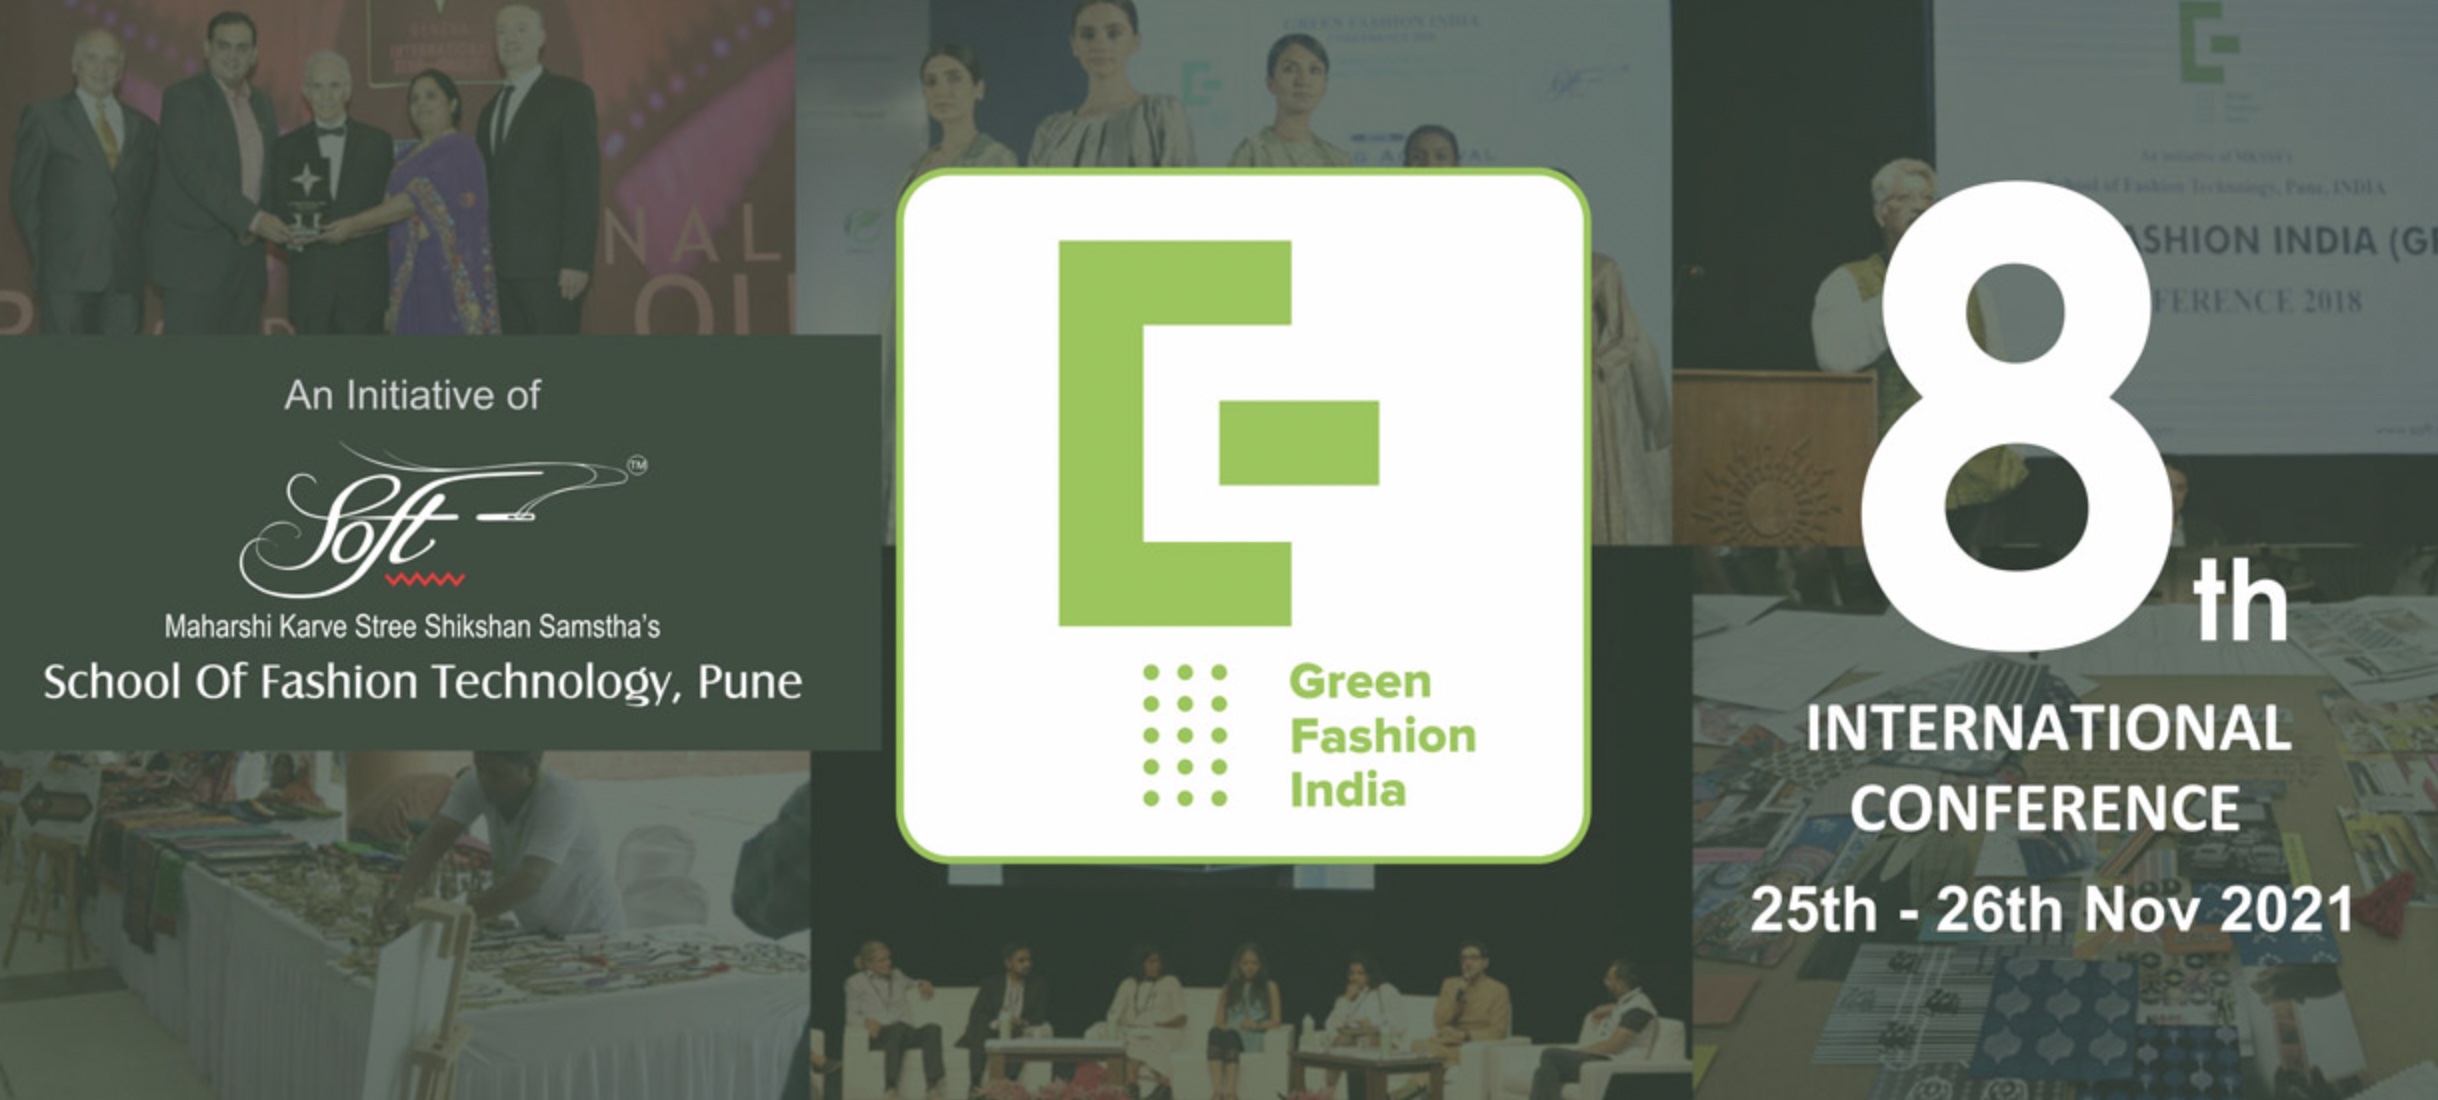 Green Fashion India Conference